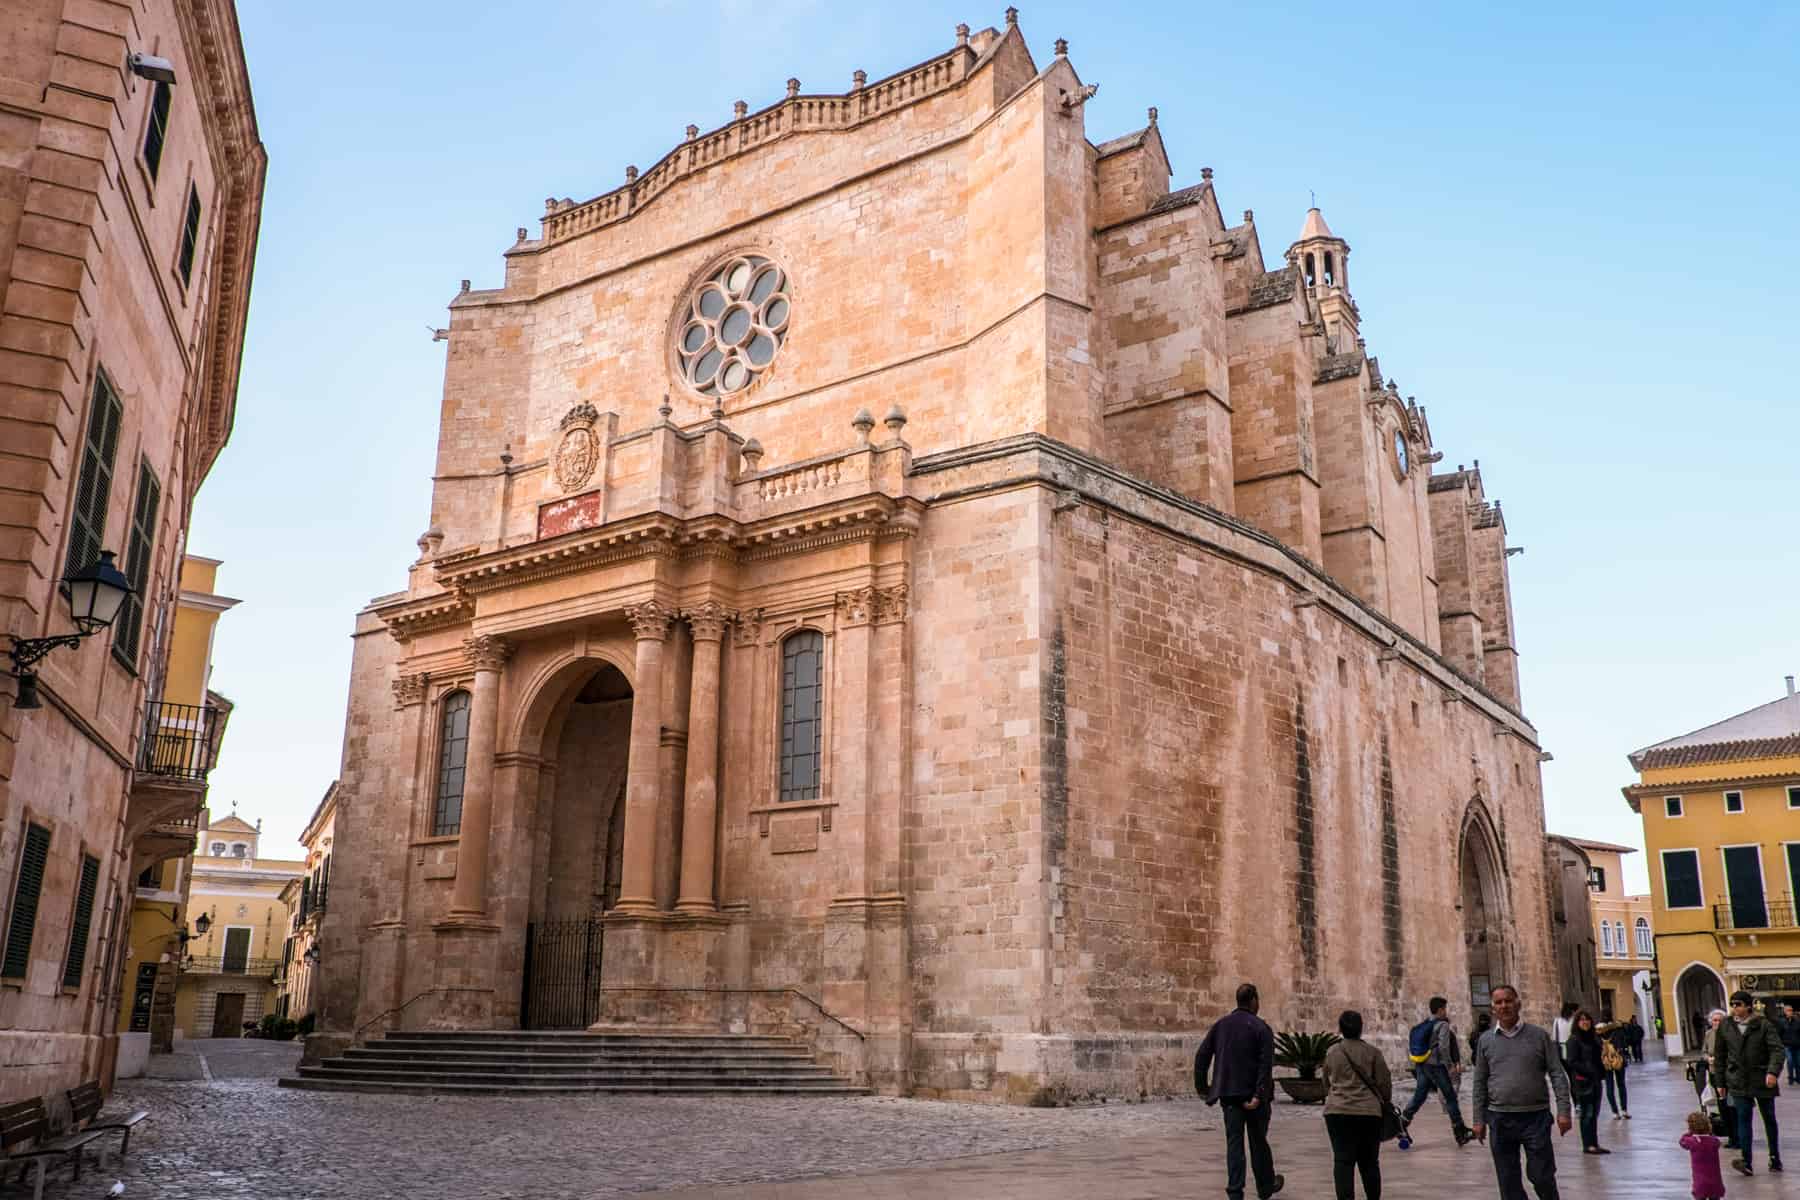 The large golden orange structure of the Ciutadella Cathedral on the island on Menorca.